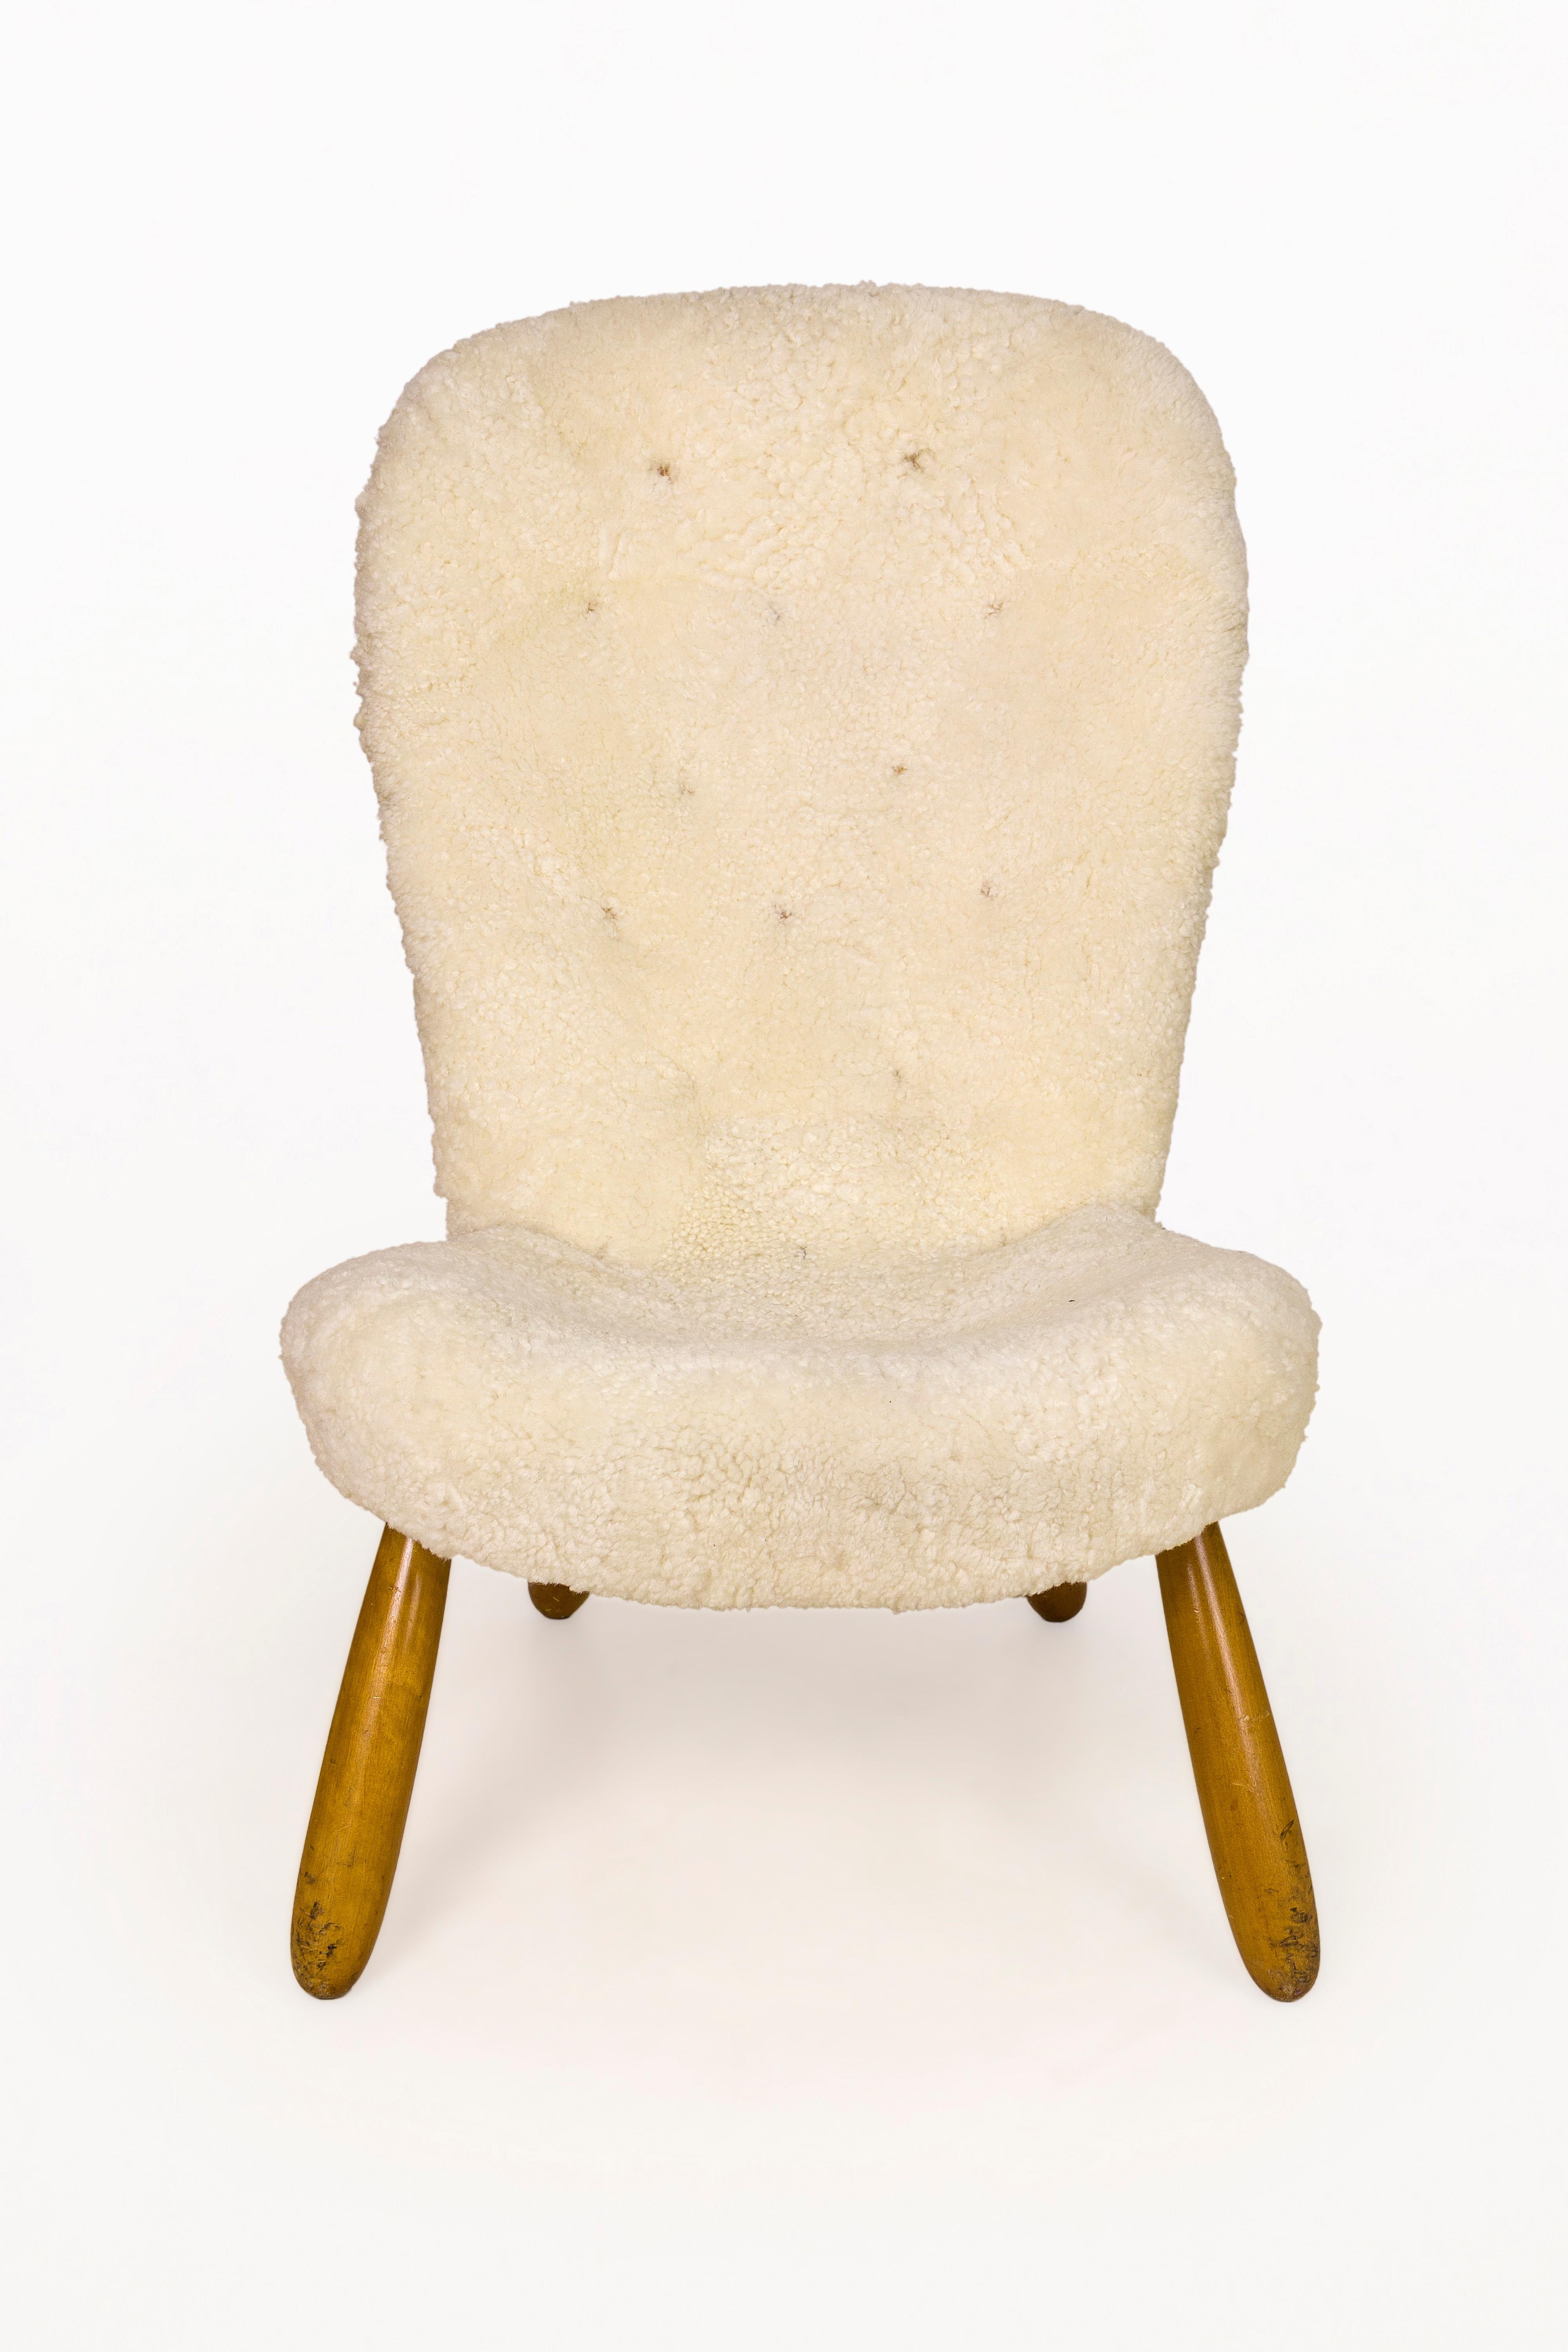 Clam chair by Philip Arctander
Rounded oak legs
Solid, comfortable and stylish
